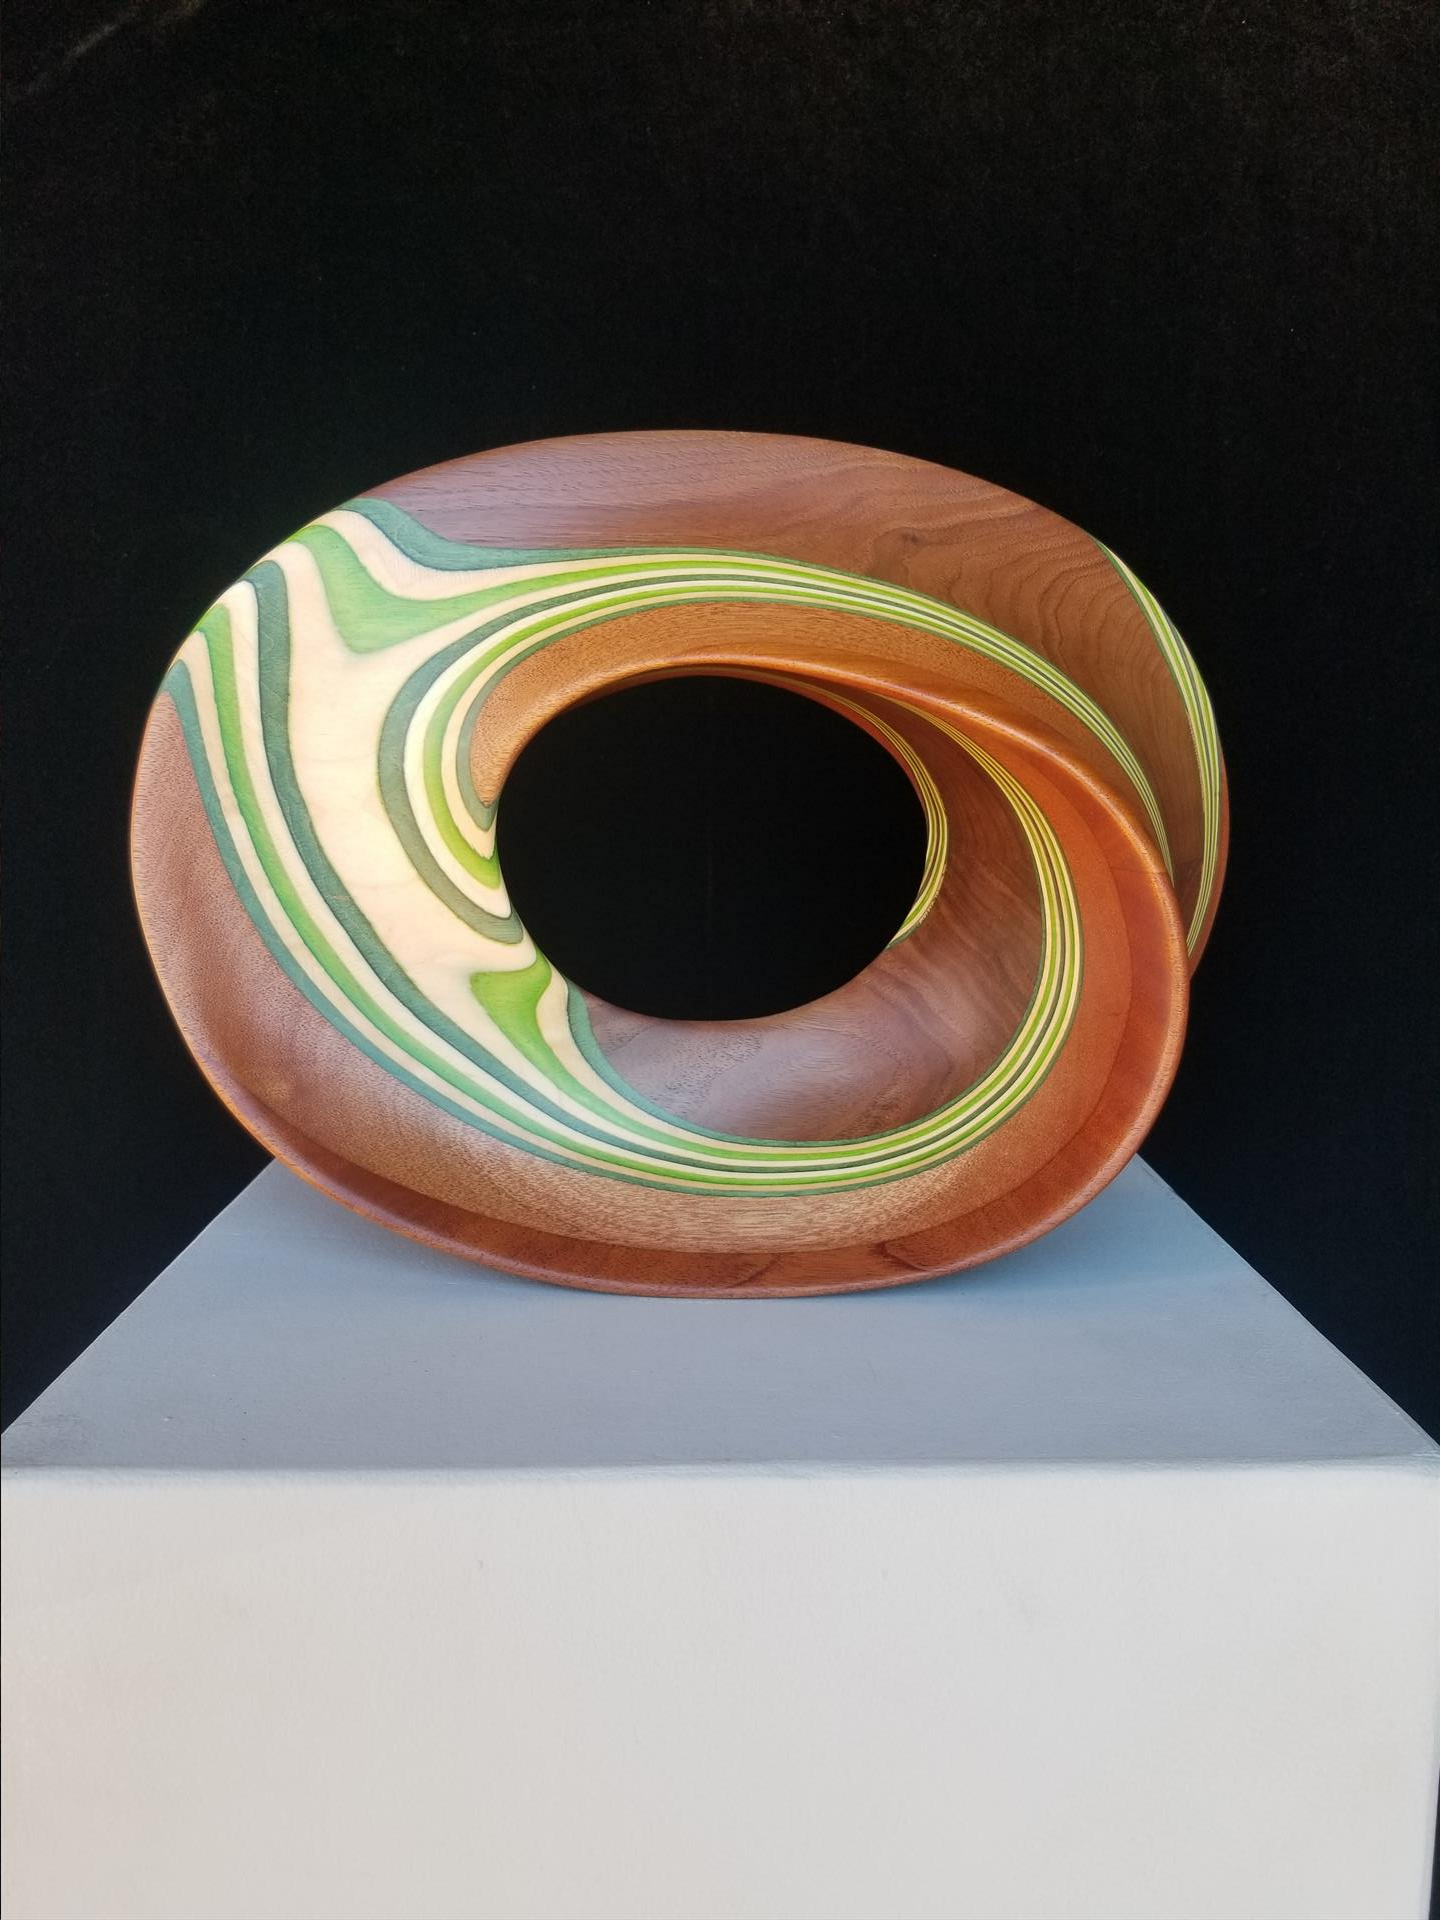 Steve Lawrence, Green Mobius. Wood sculpture, walnut, mahogany, and color dyed maple, 11x15x5.